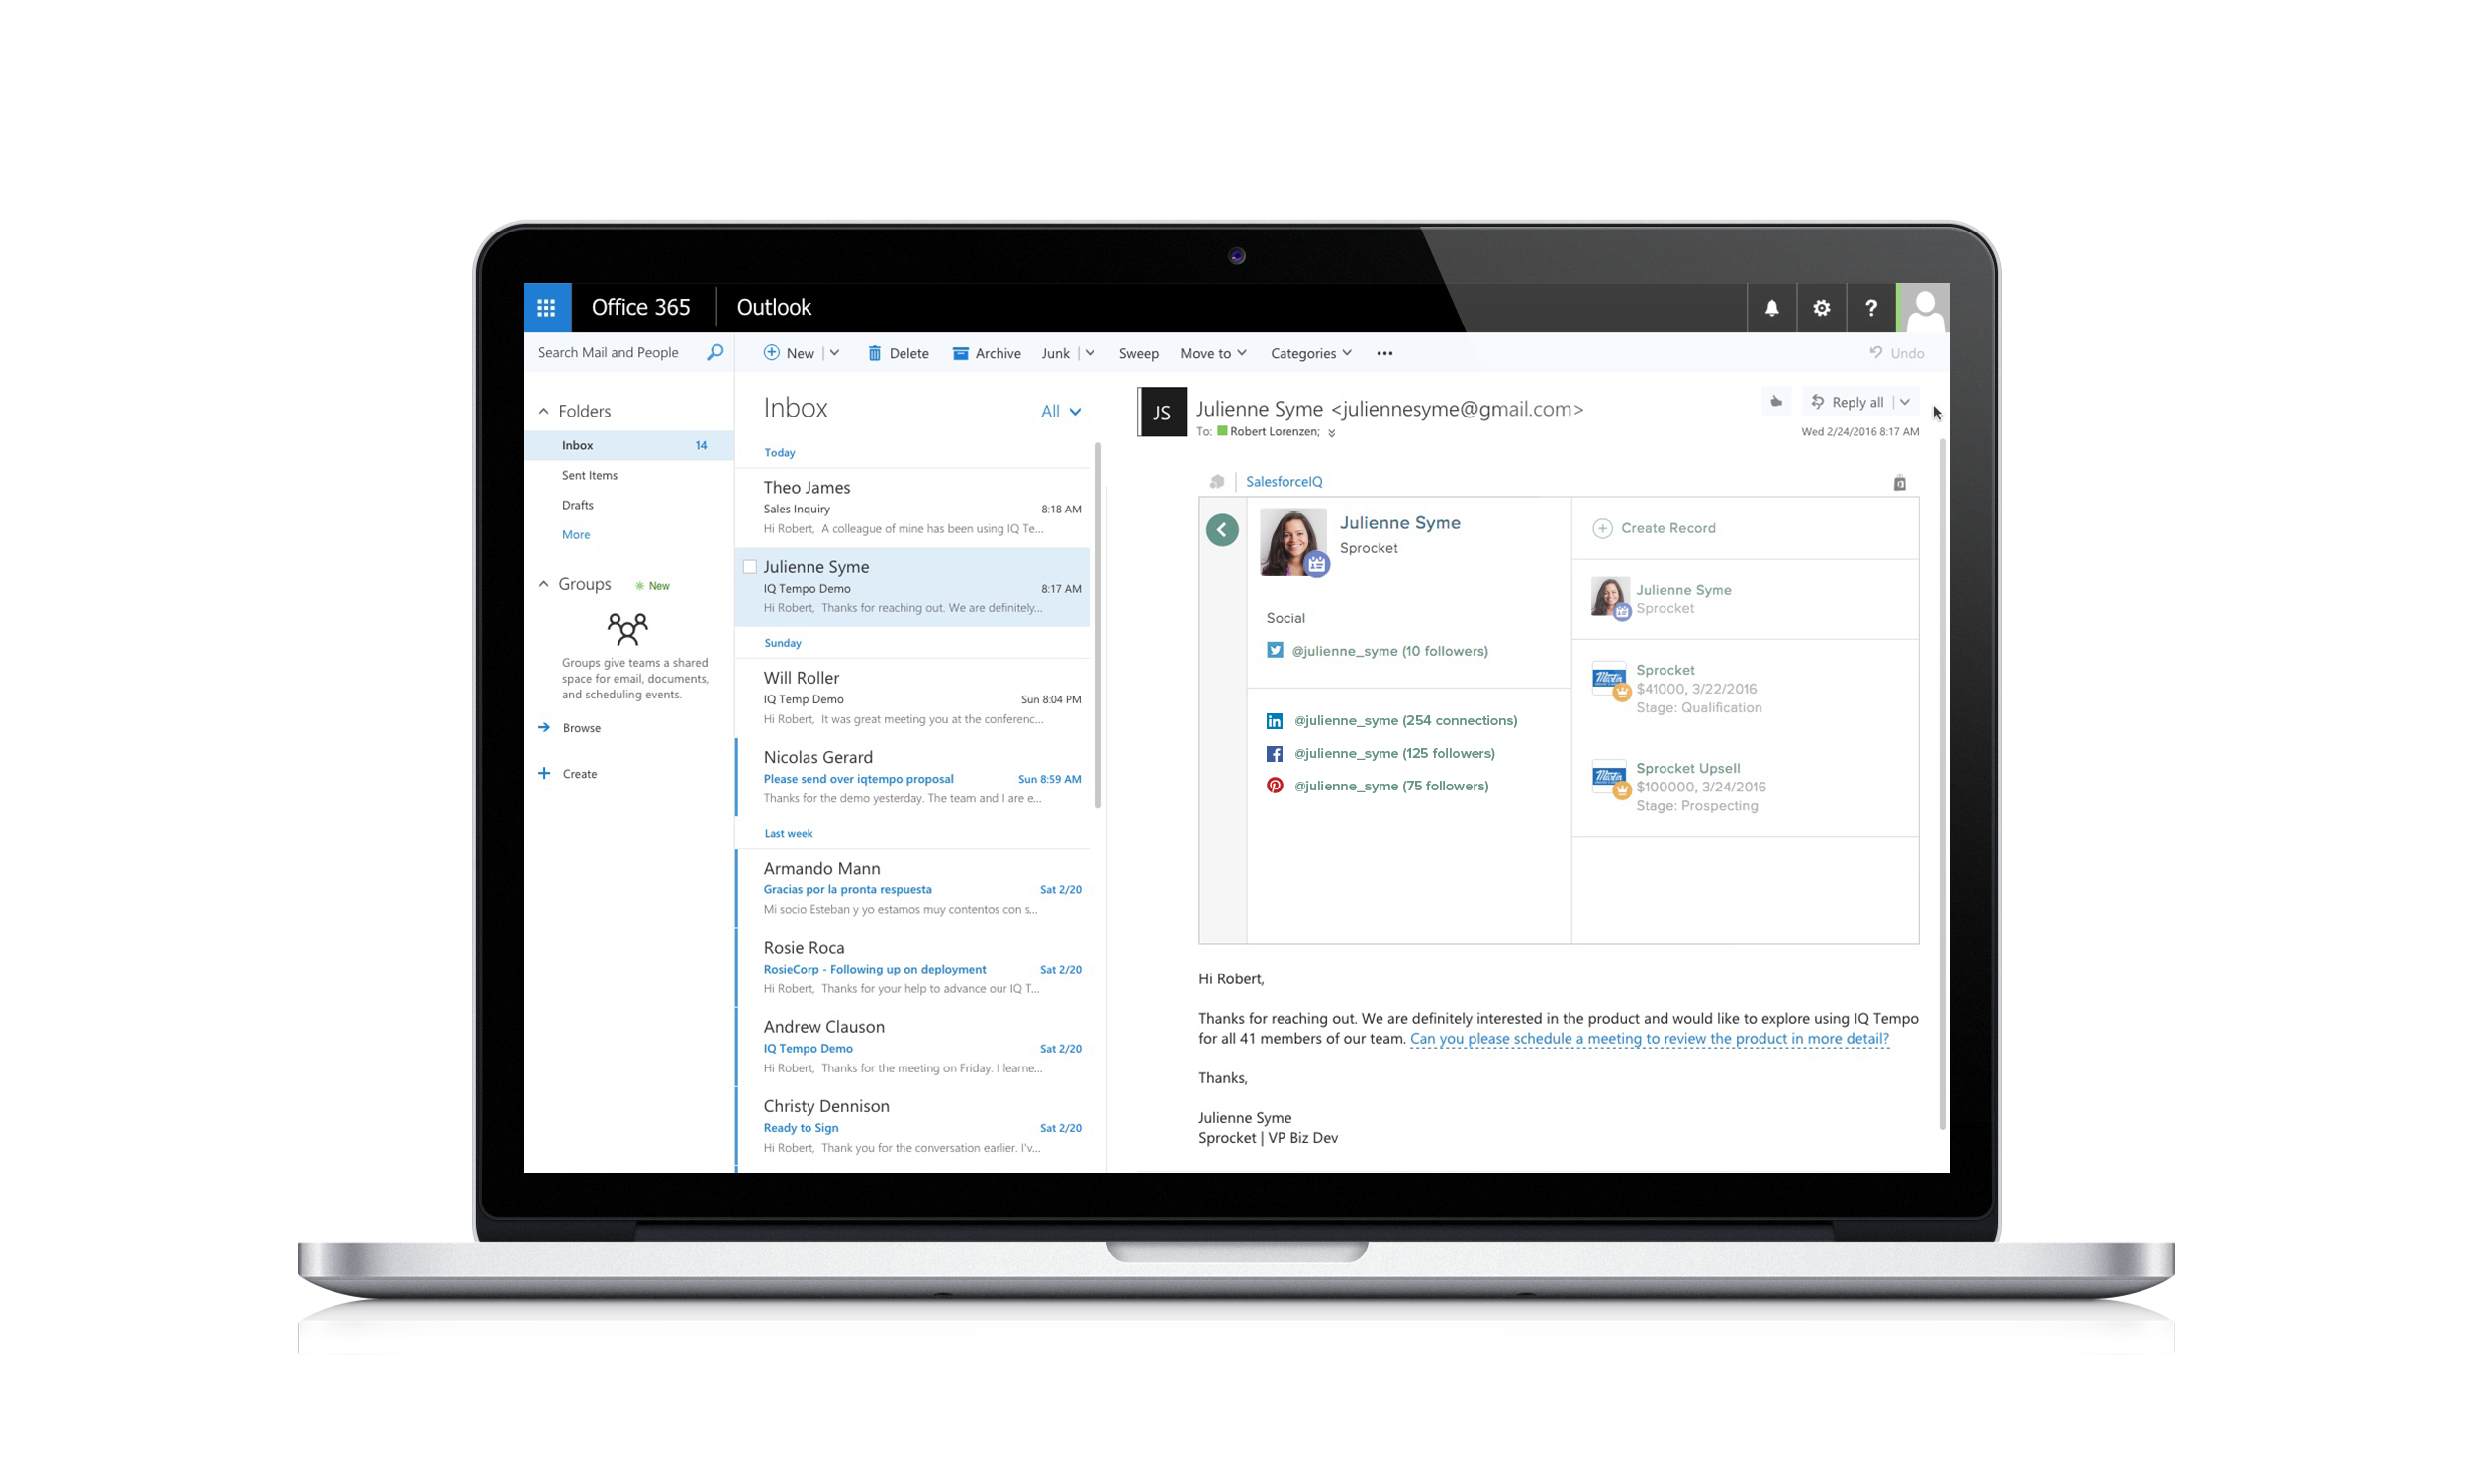 SalesforceIQ Powers Outlook Users with Relationship Intelligence